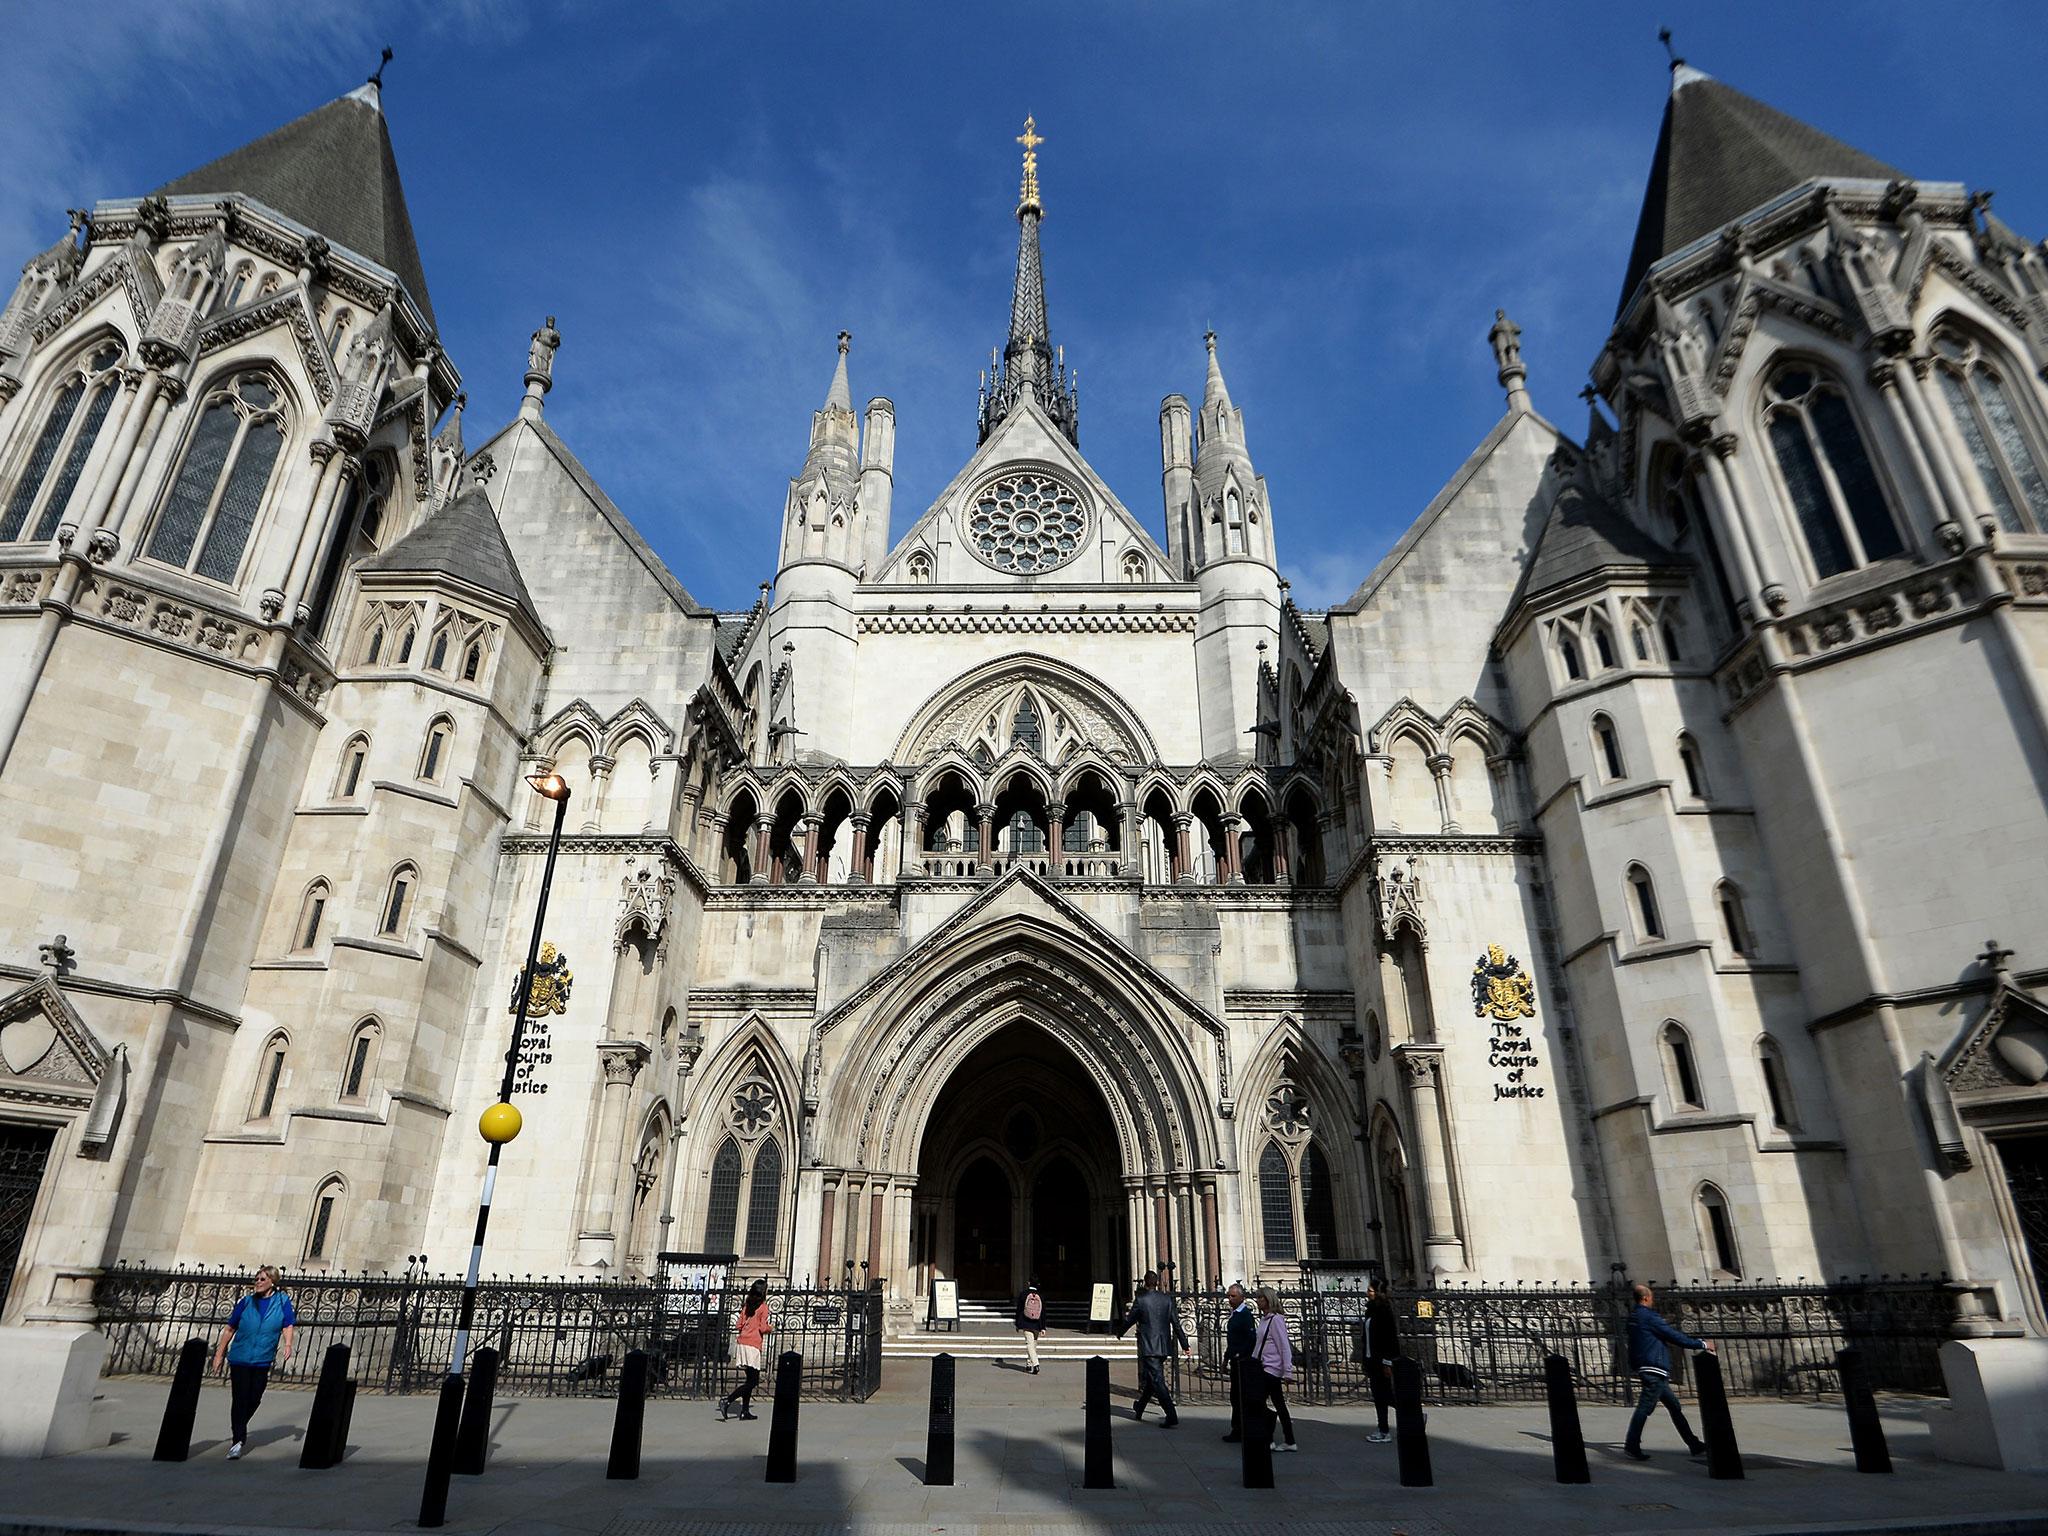 Court of Appeal judges overturned a previous High Court judgment to uphold the injunction on Tuesday